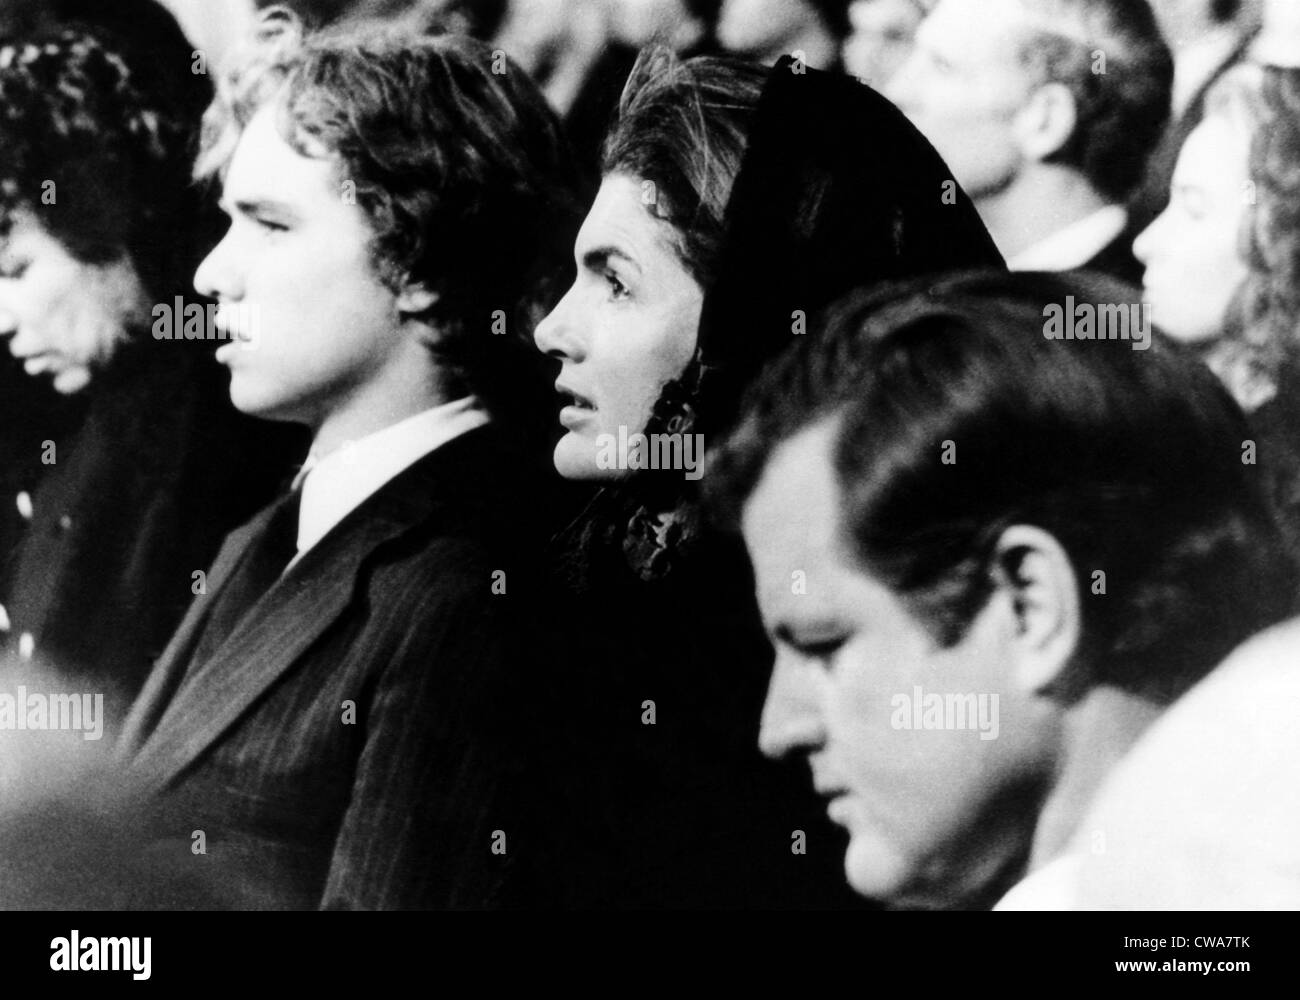 The Kennedy Family attends a funeral; Ethel Kennedy, Joseph Kennedy III, former First Lady Jacqueline Kennedy Onassis and Stock Photo